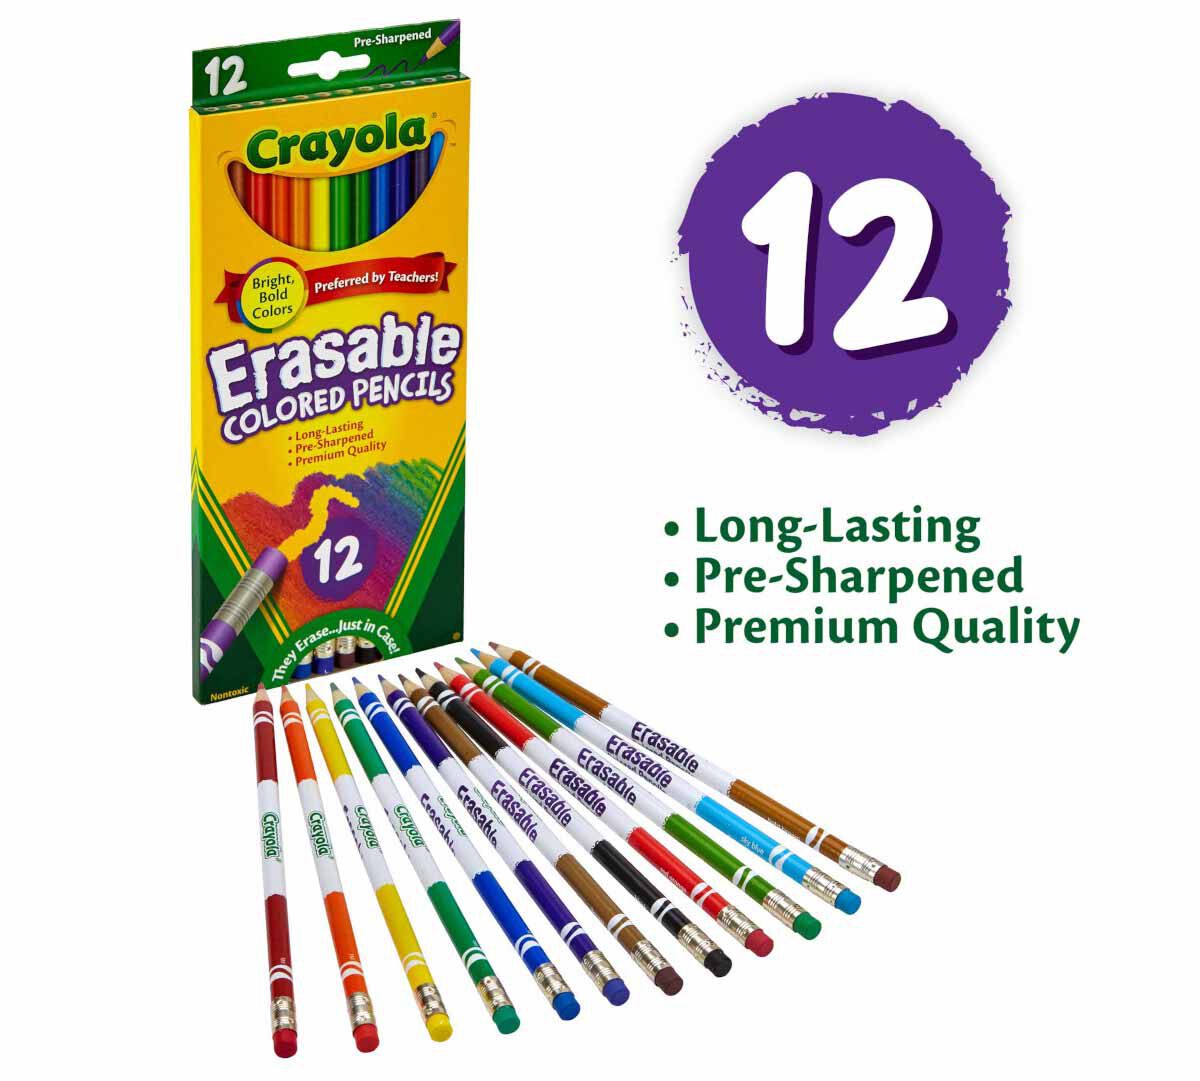 Adult Coloring Case of 12 Packs 50 Count Crayola Colored Pencils Fun At Home Kids Activities 